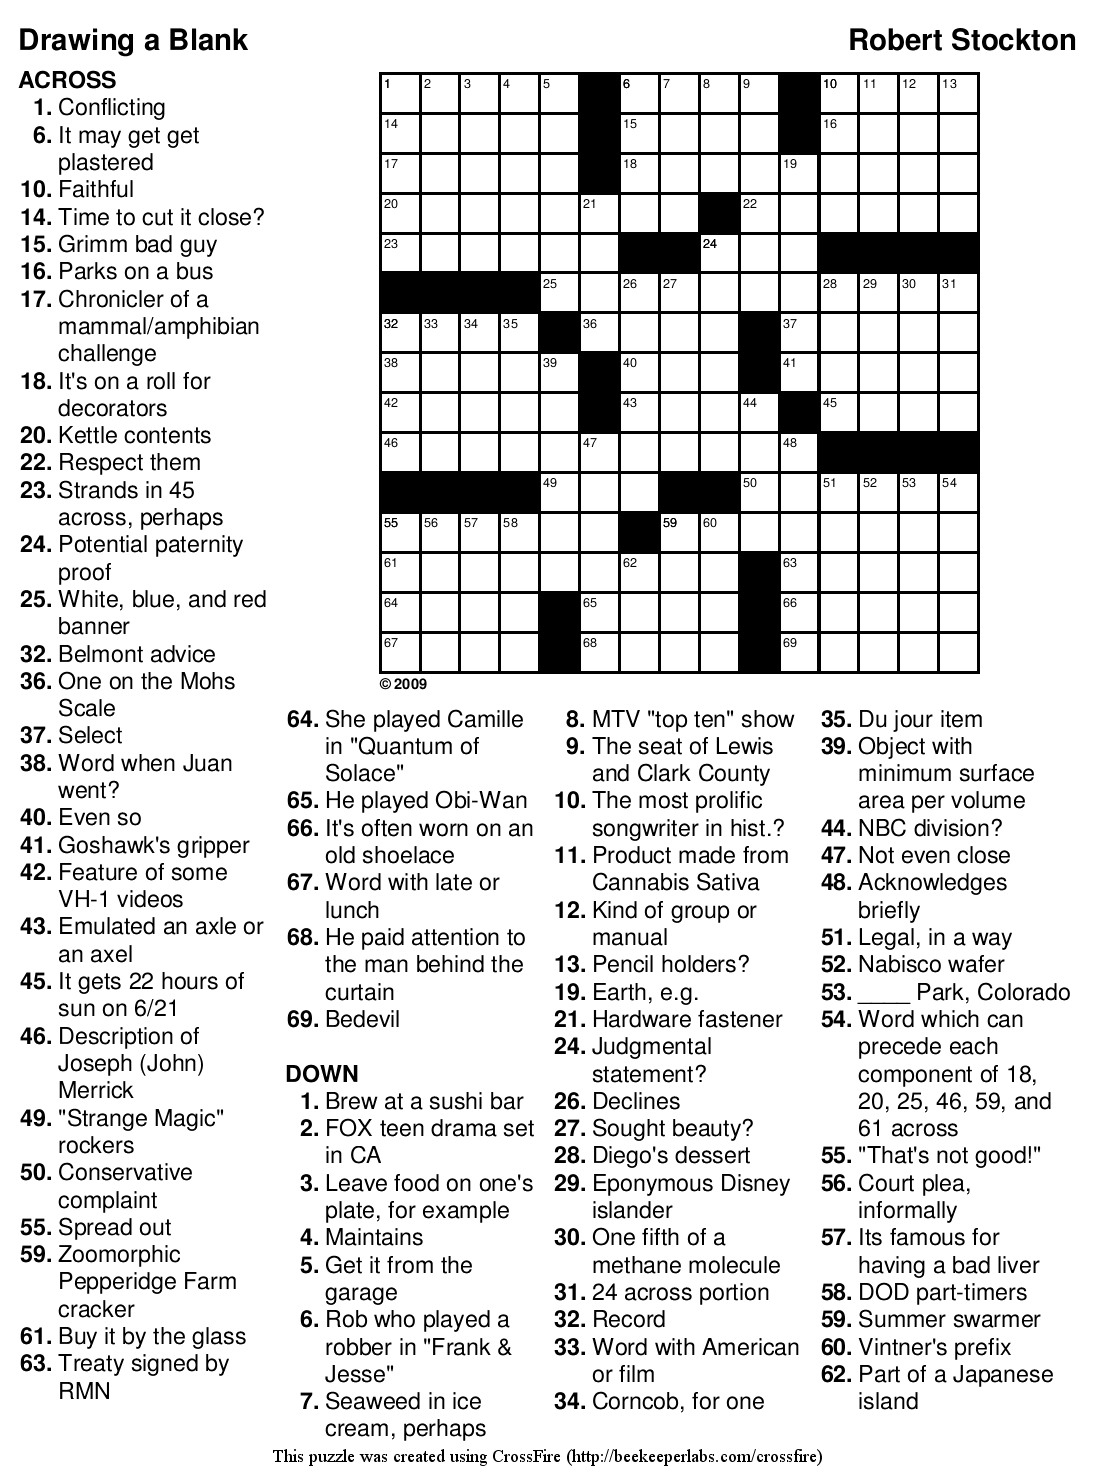 Crossword Puzzles Printable - Yahoo Image Search Results | Crossword - Algebra 1 Crossword Puzzles Printable